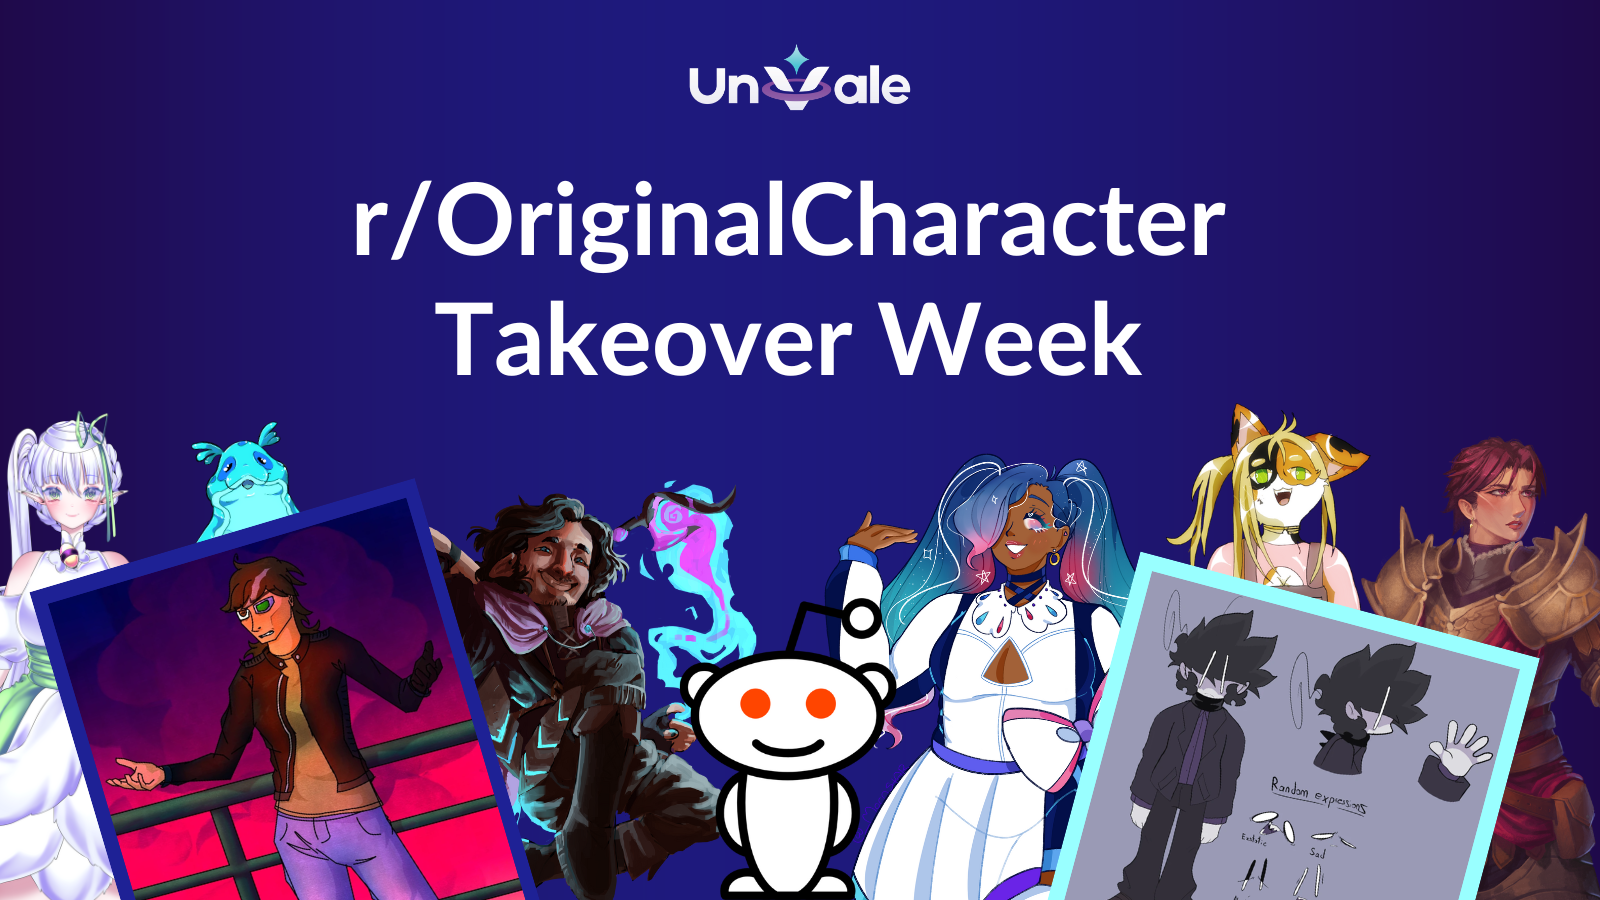 r/OriginalCharacter Takeover Week on UnVale